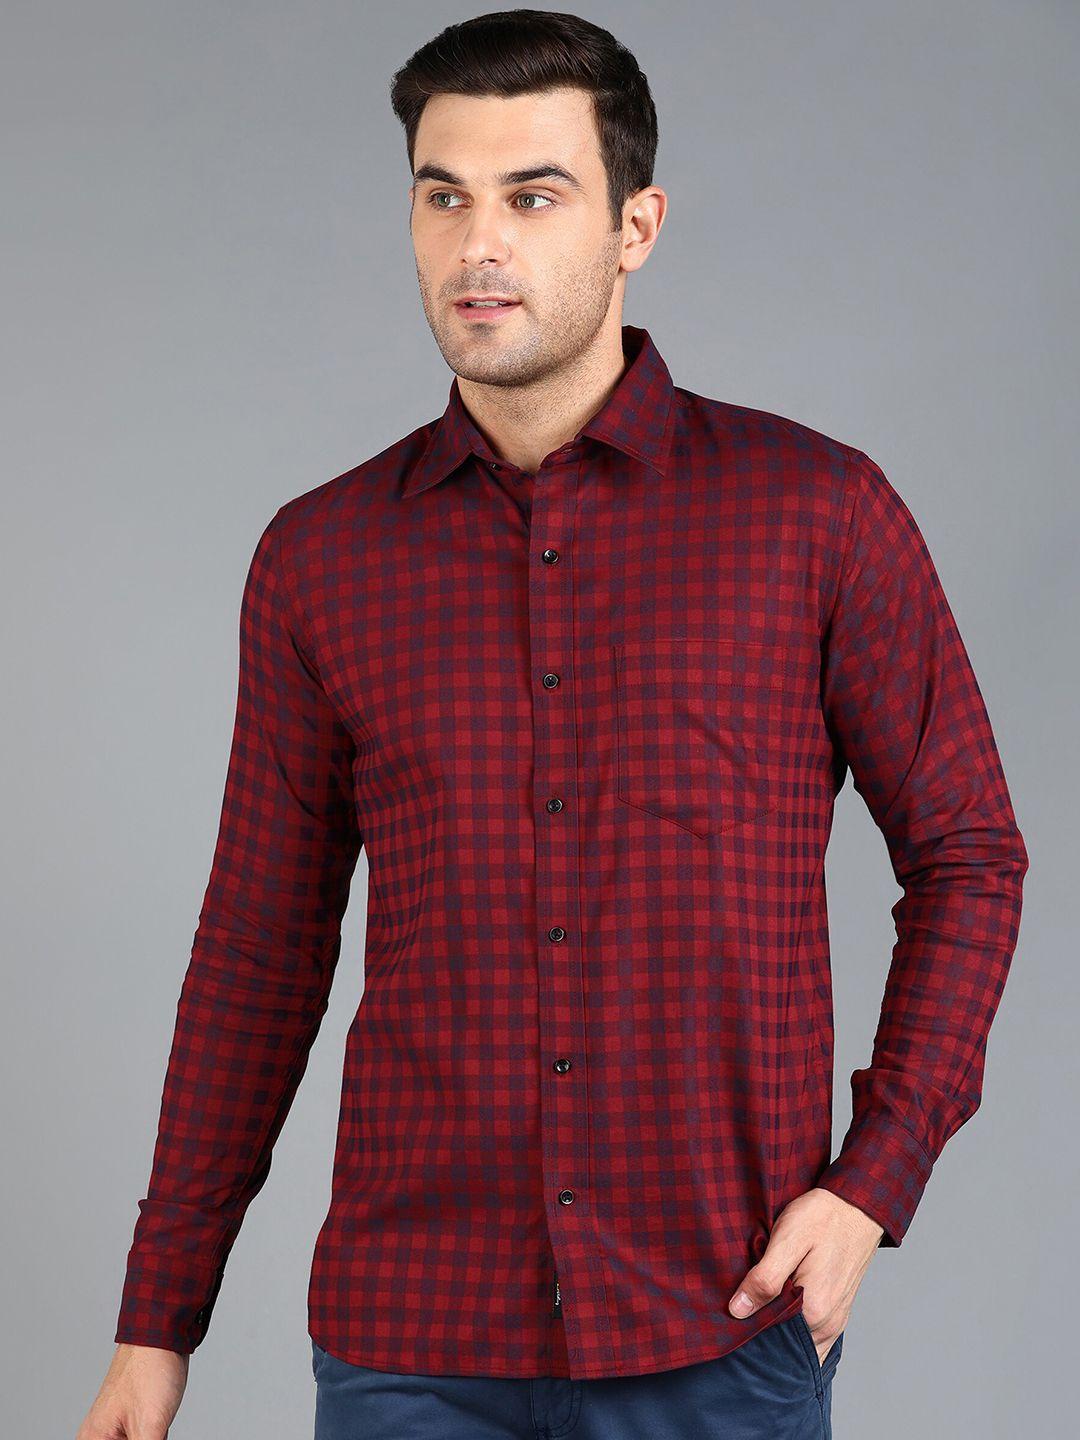 znx-clothing-men-red-premium-slim-fit-opaque-checked-formal-shirt